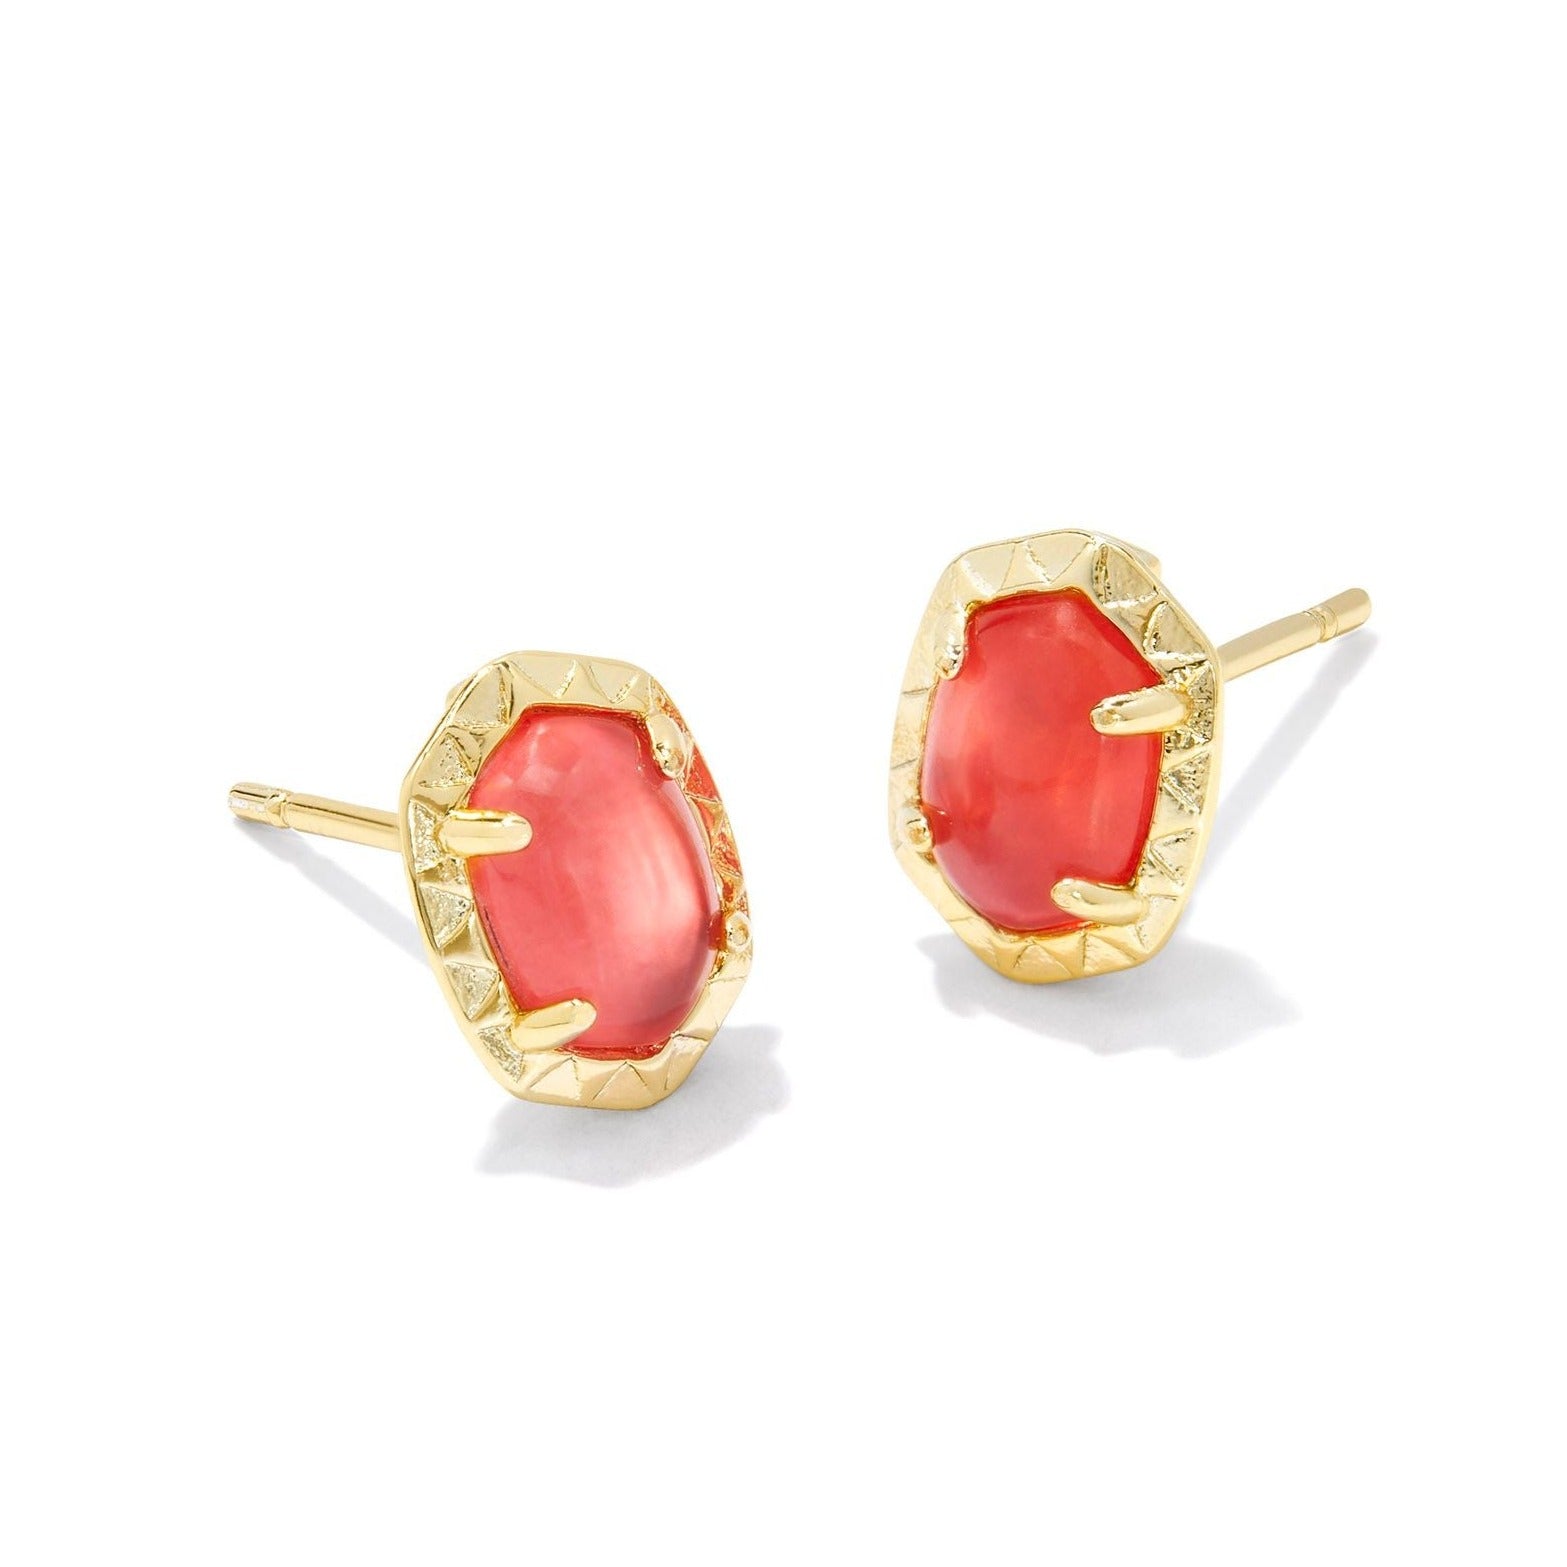 Kendra Scott | Daphne Gold Stud Earrings in Coral Pink Mother of Pearl - Giddy Up Glamour Boutique